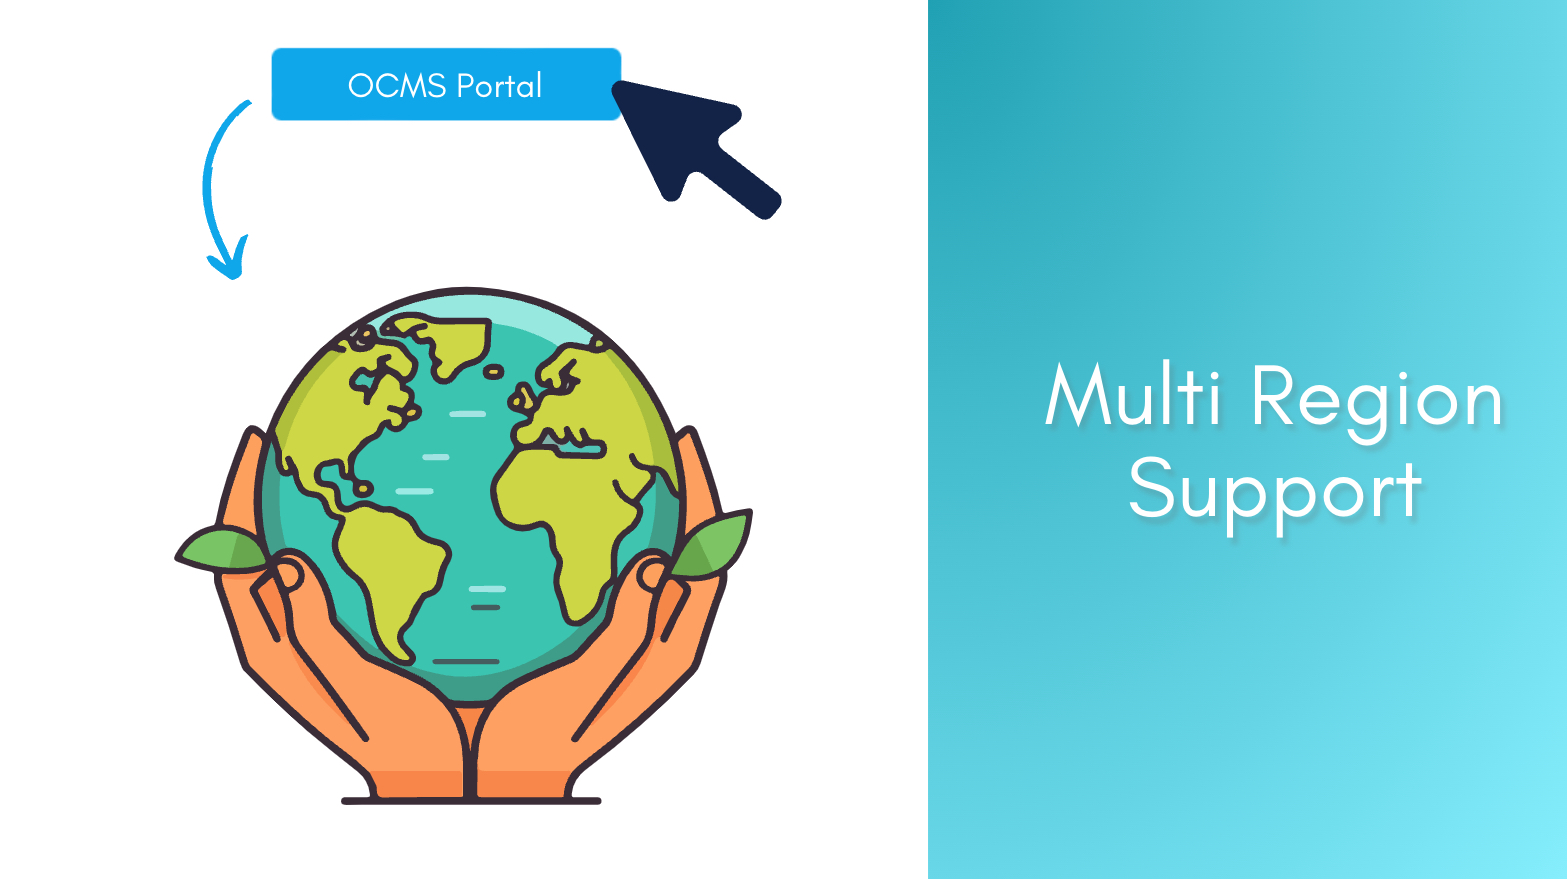 Access OCMS Portal from any country